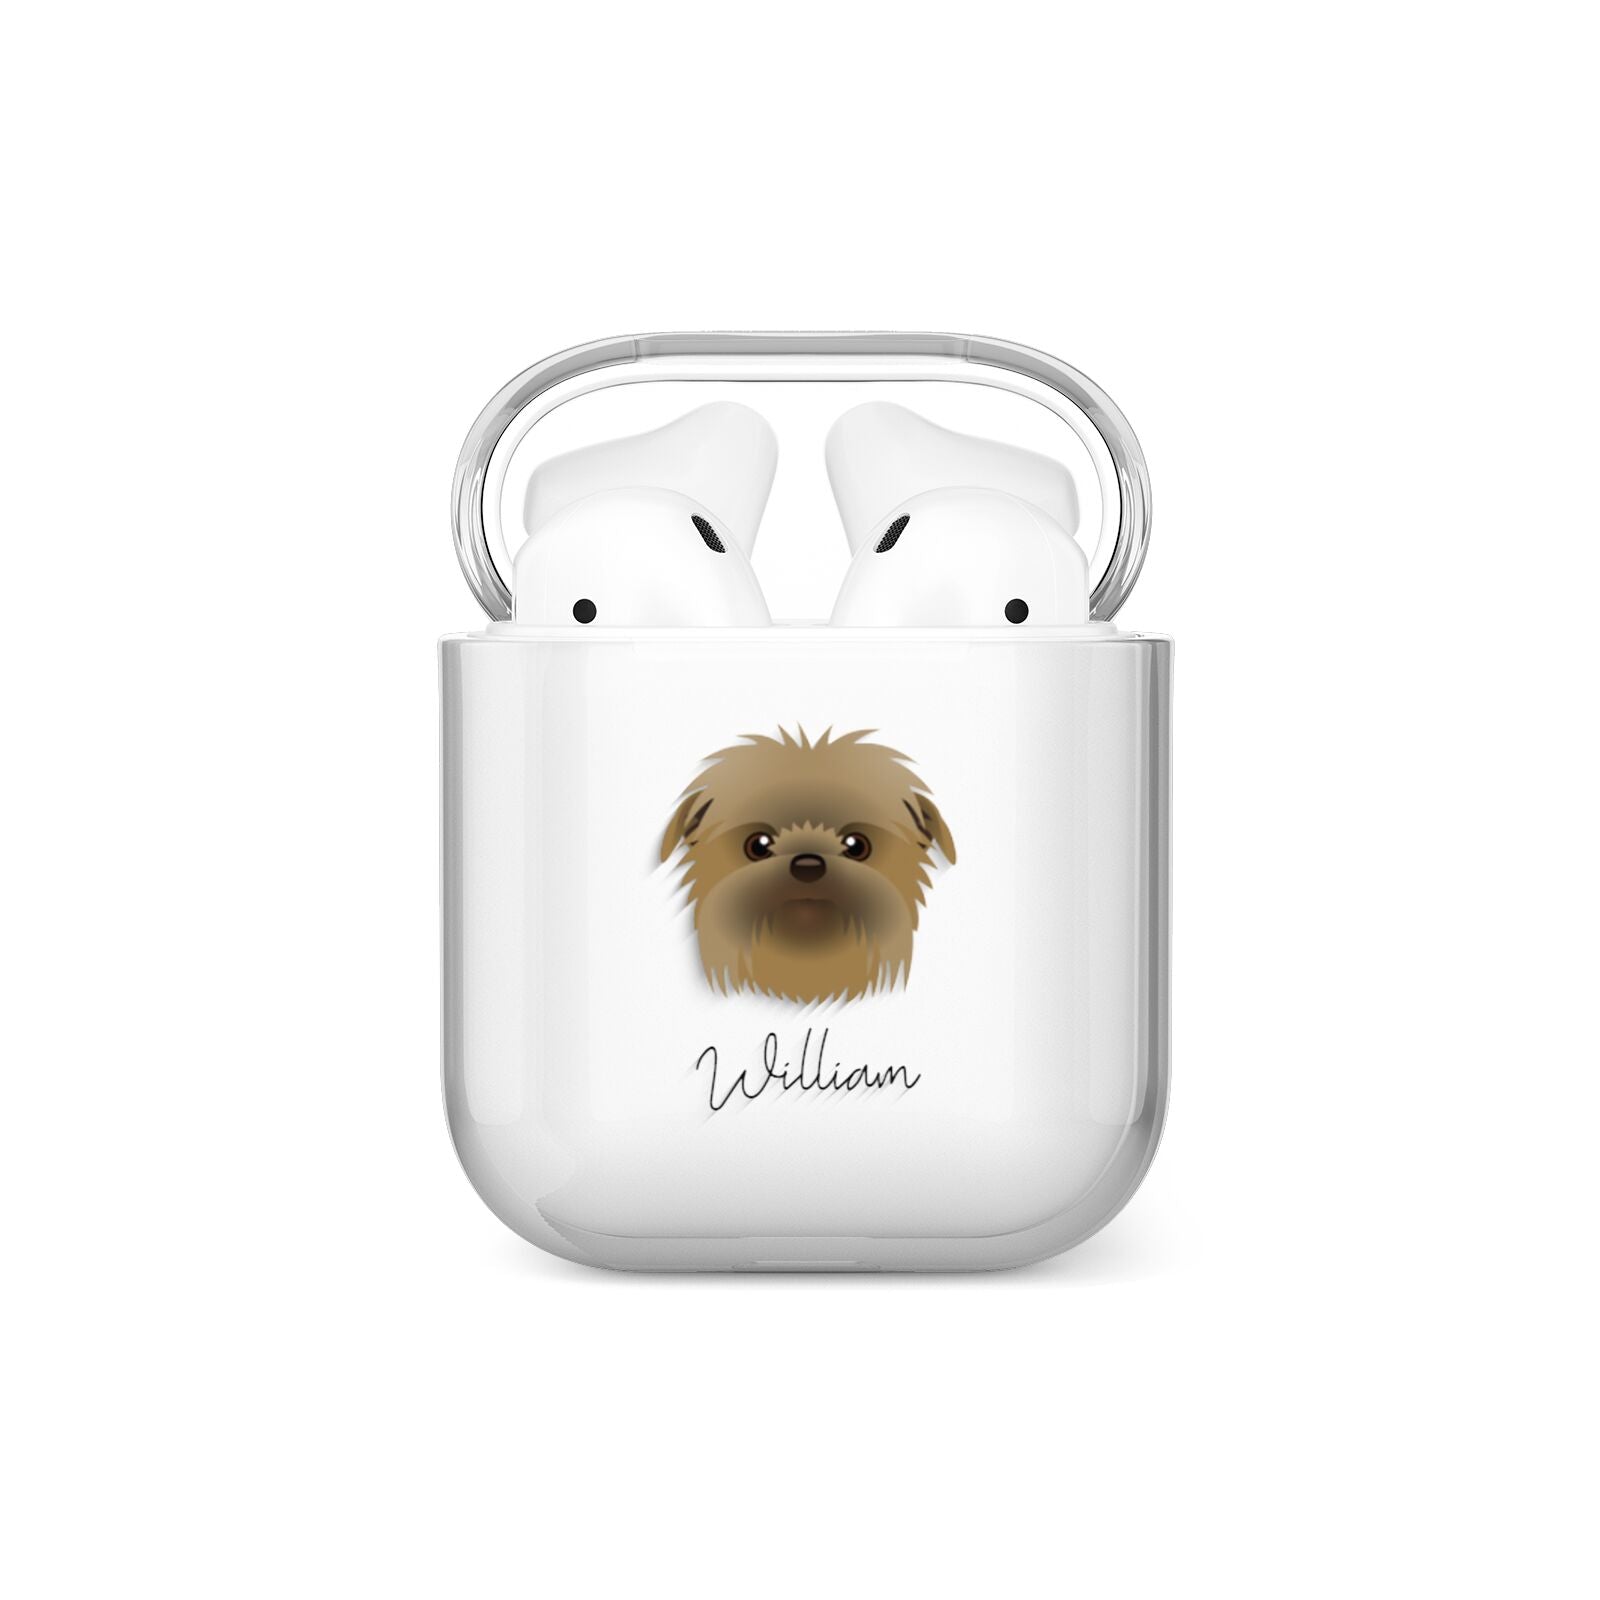 Affenpinscher Personalised AirPods Case